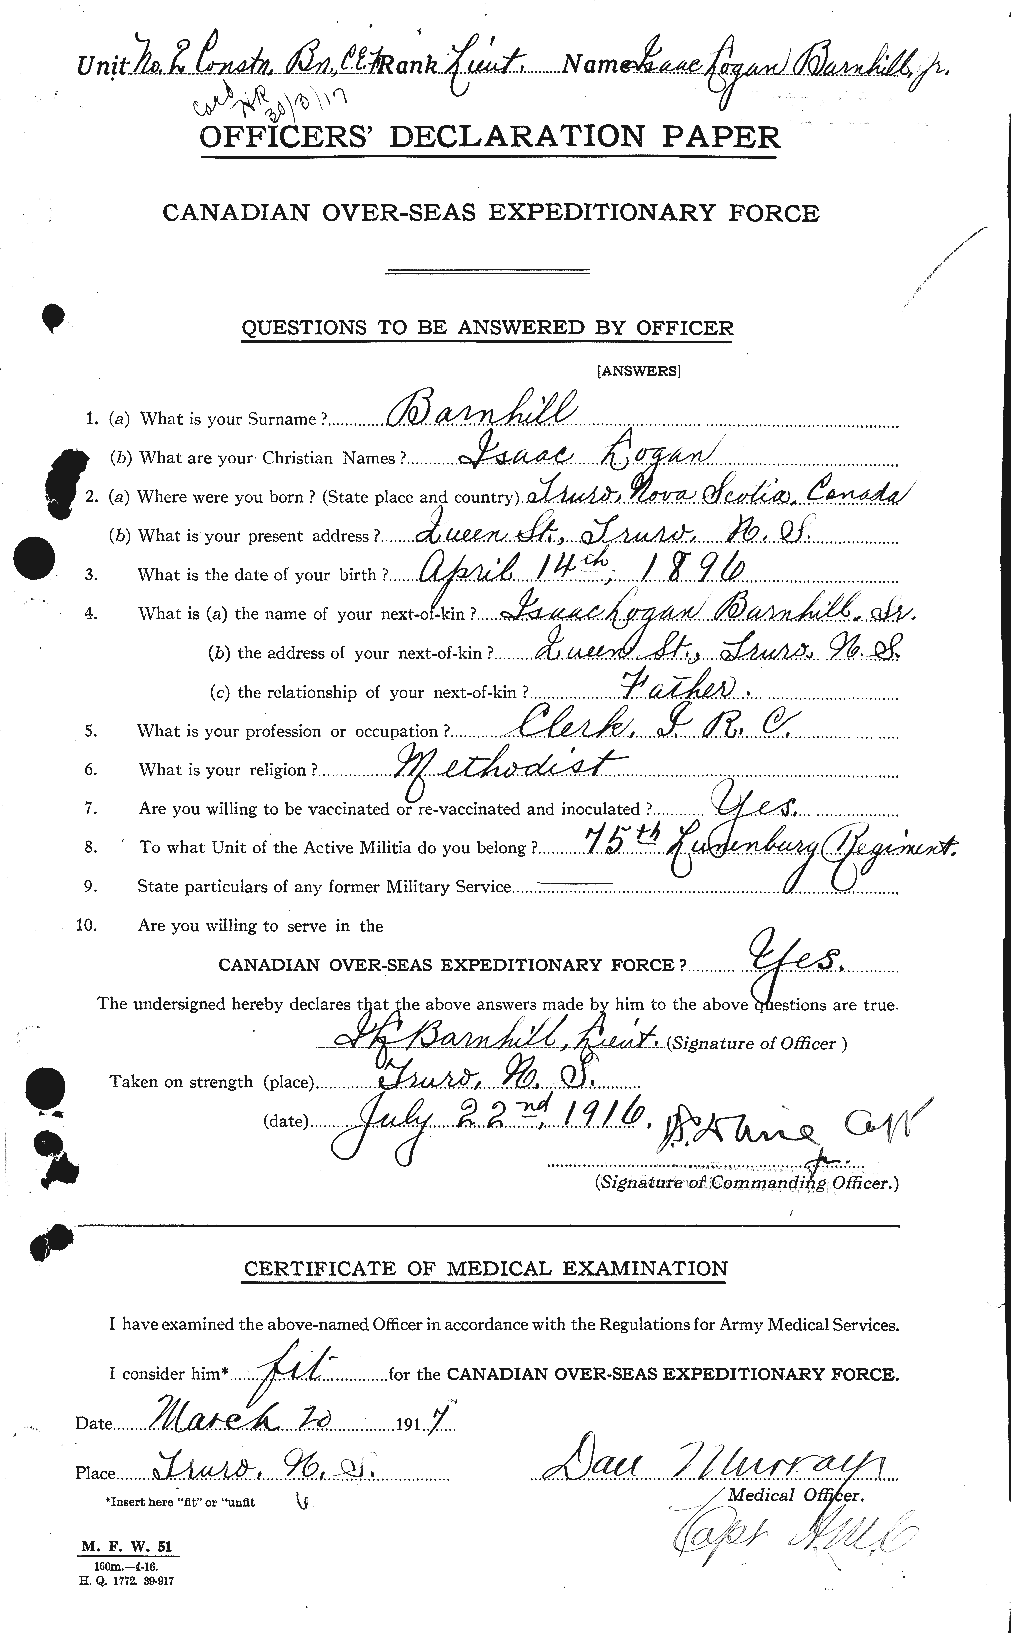 Personnel Records of the First World War - CEF 222802a